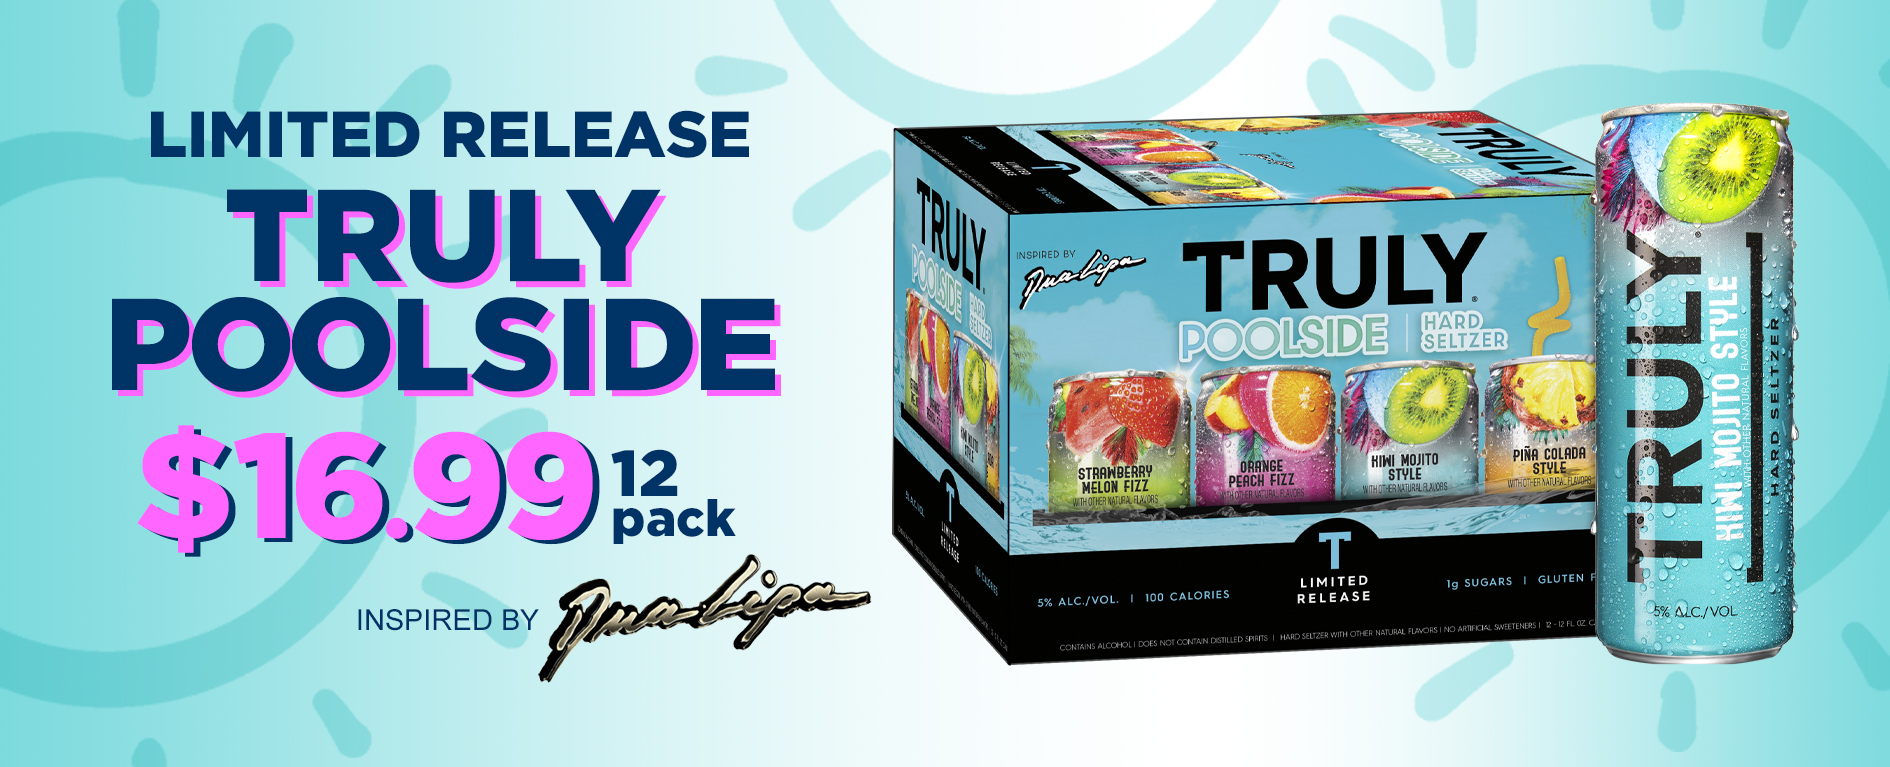 Limited release Truly Poolside 12 packs